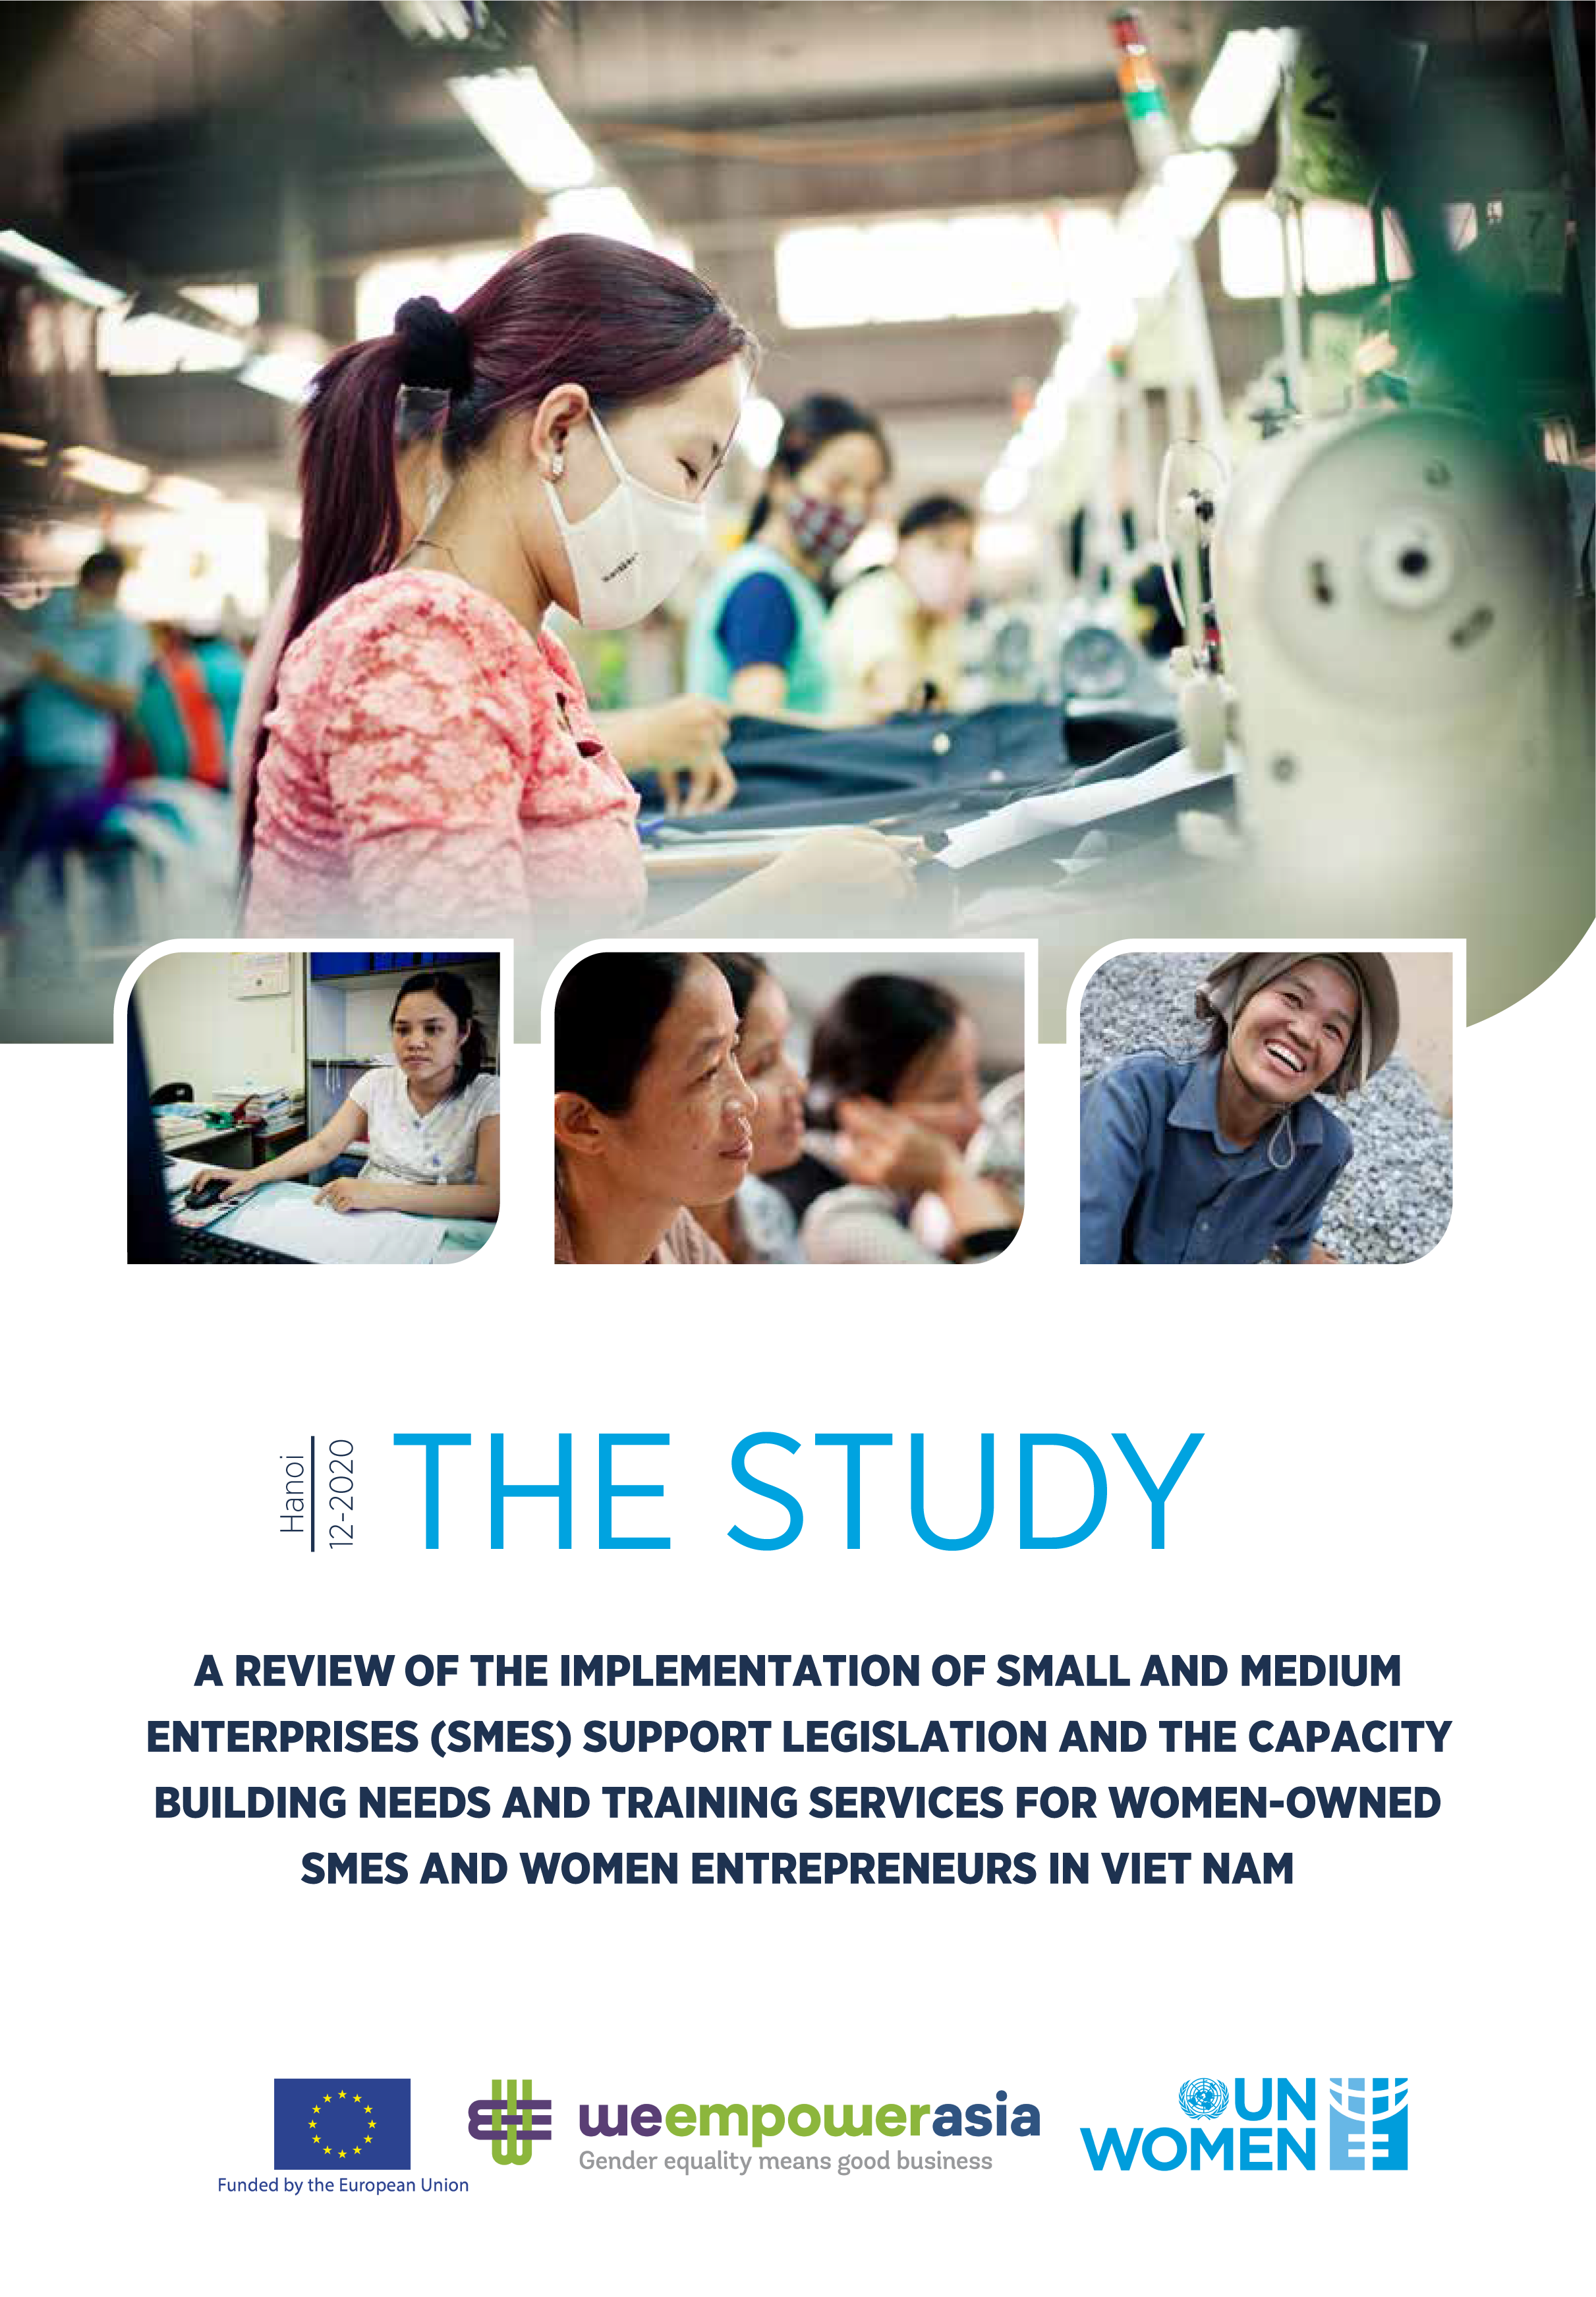 "Review of the implementation of small and medium enterprises (SMES) support legislation and the capacity building needs and training services for women-owned SMES and women entrepreneurs in Viet Nam" study report